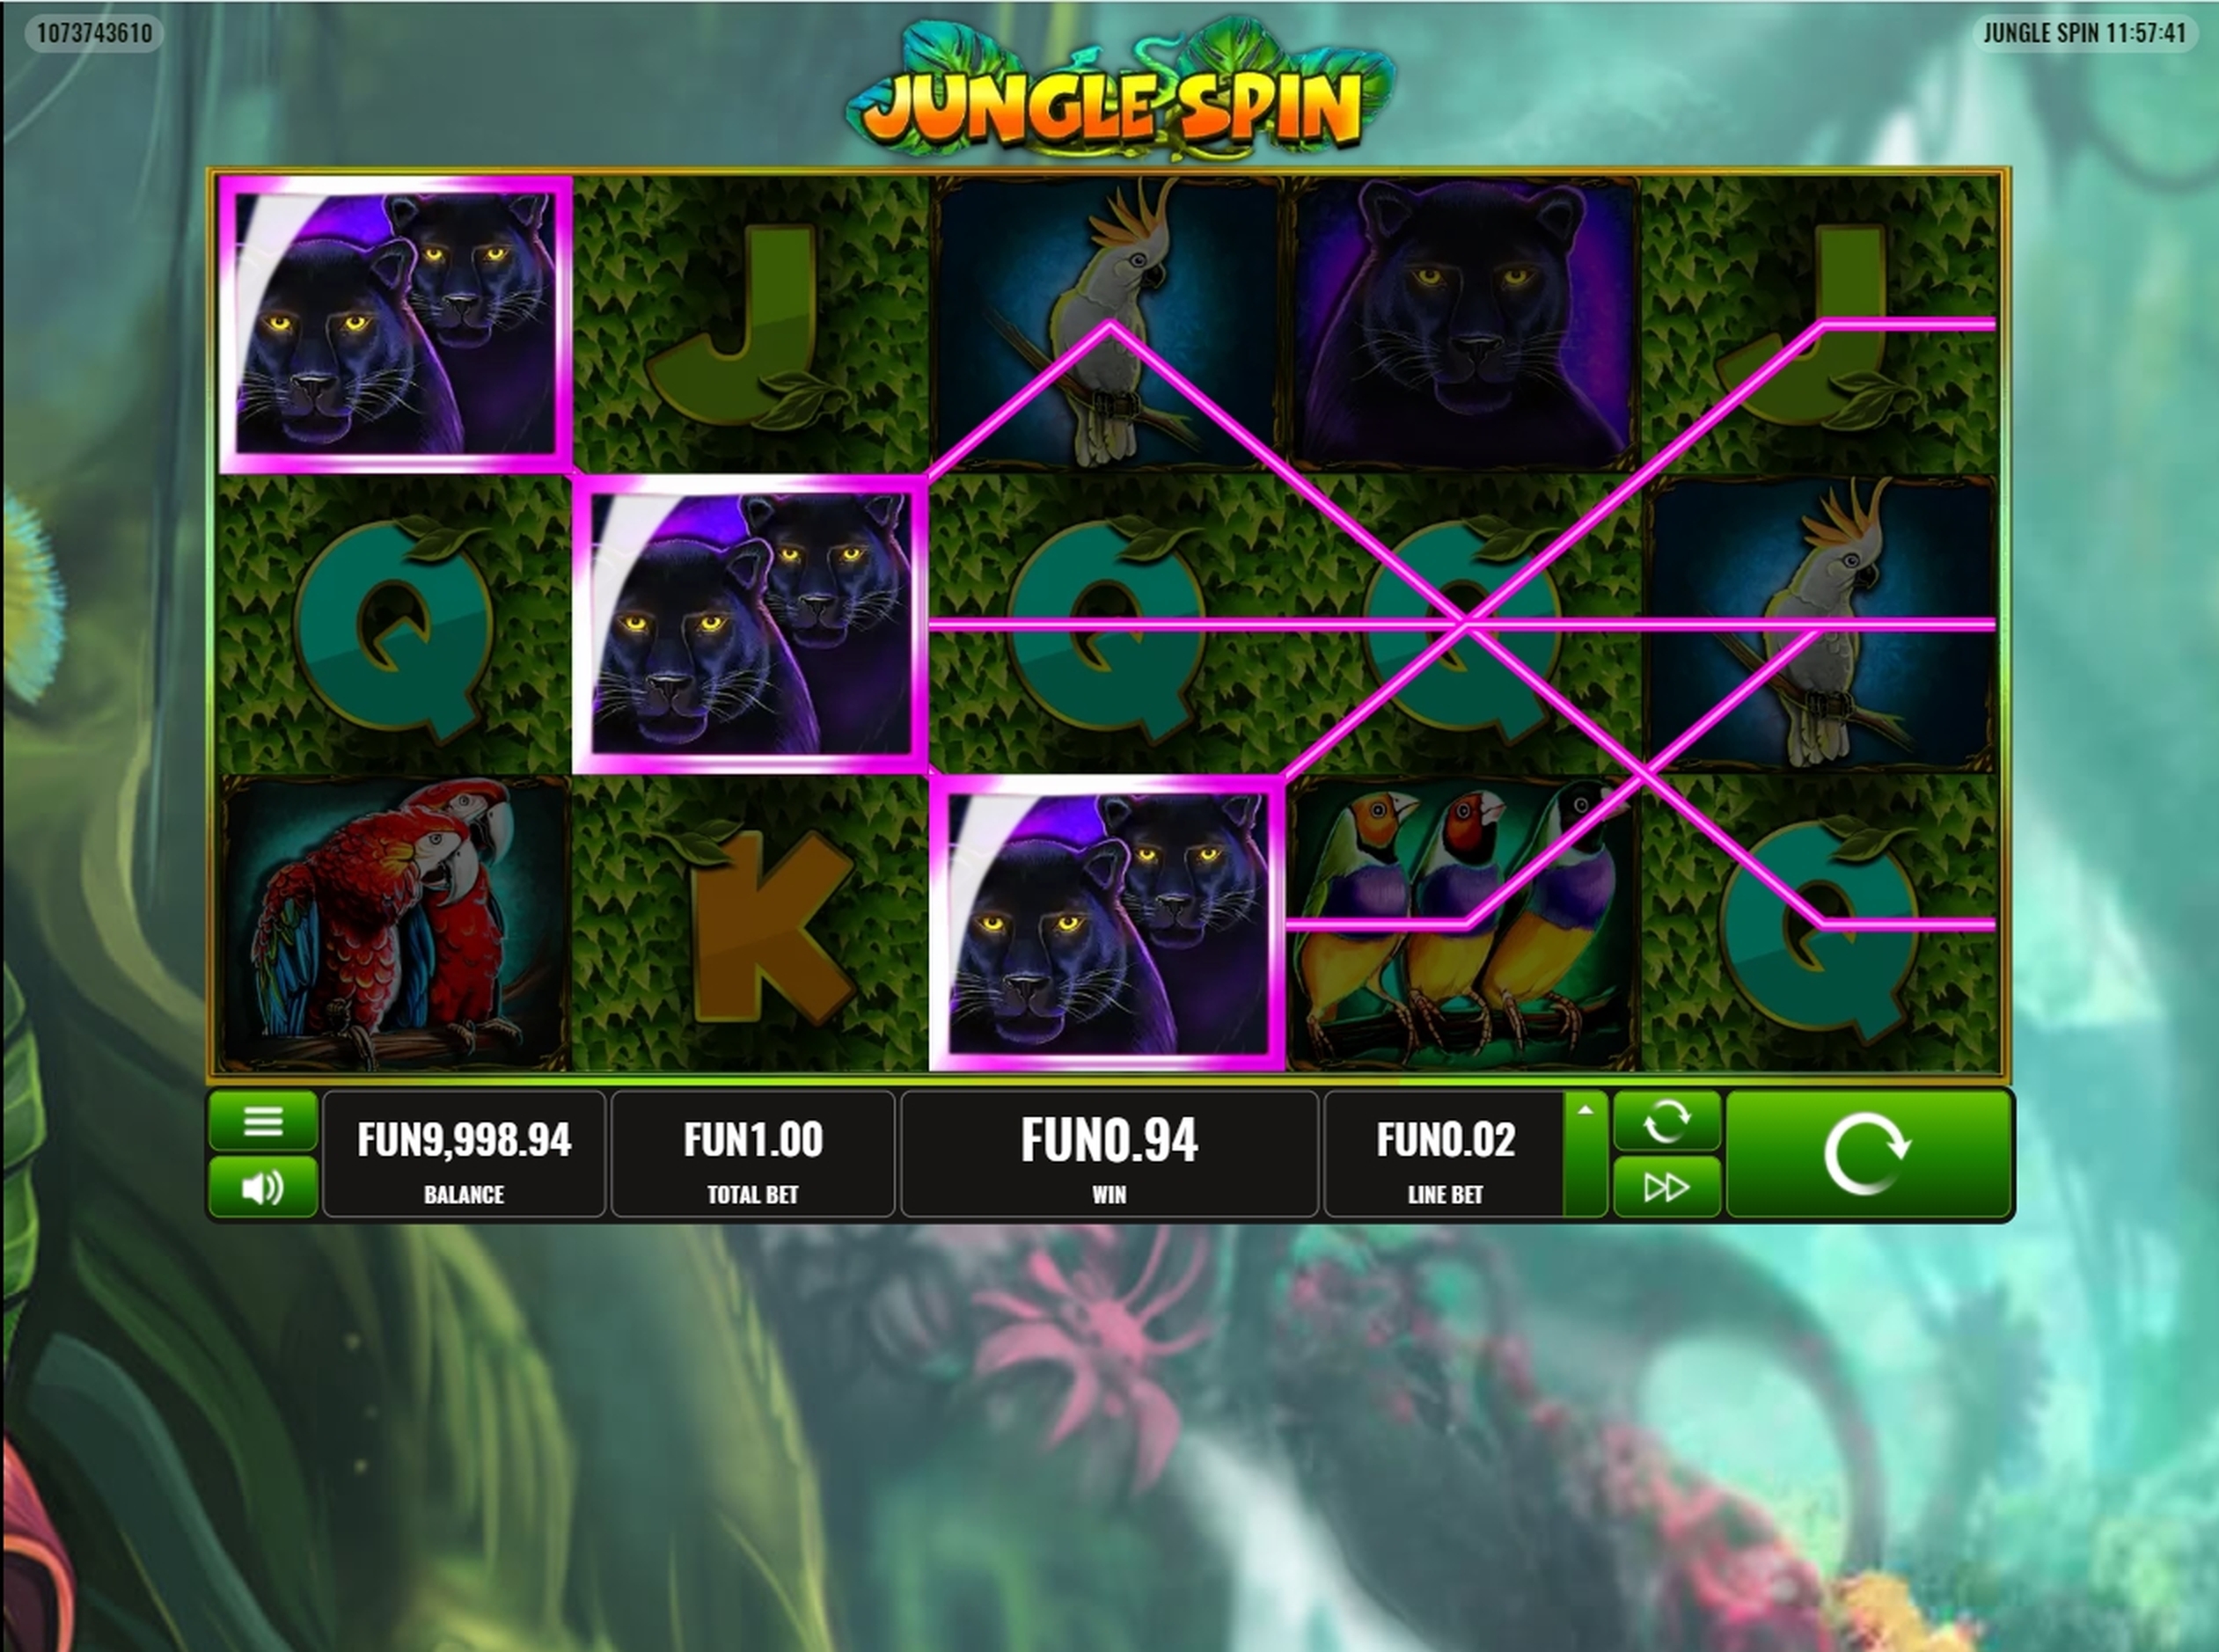 Win Money in Jungle Spin Free Slot Game by Platipus